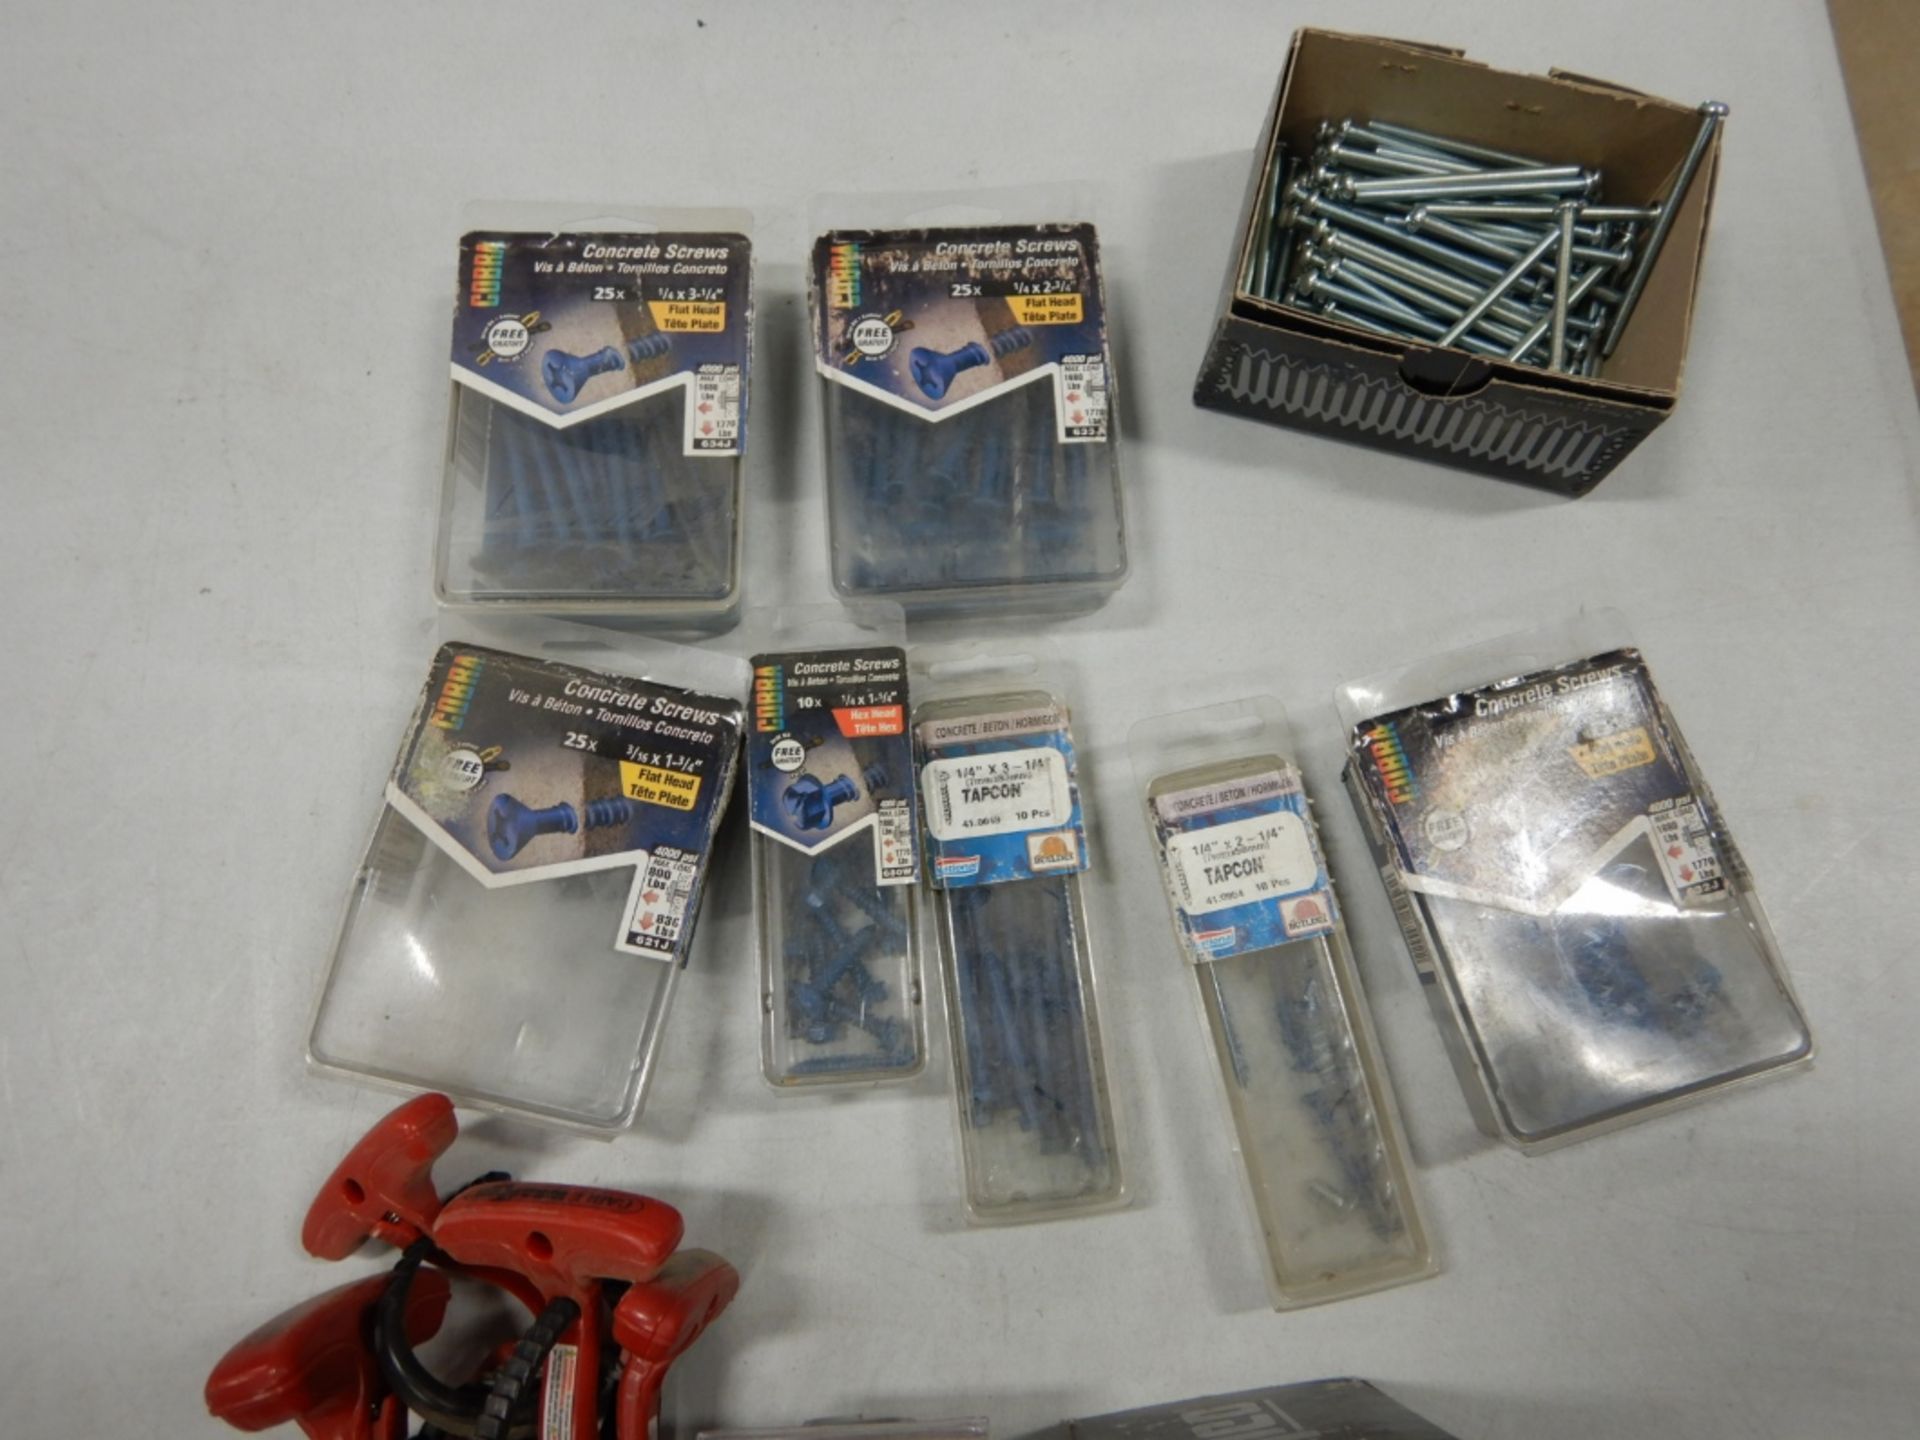 L/O ASSORTED SCREWS, HARDWARE, BOLTS, CABLE CLAMPS, ETC. - Image 4 of 5